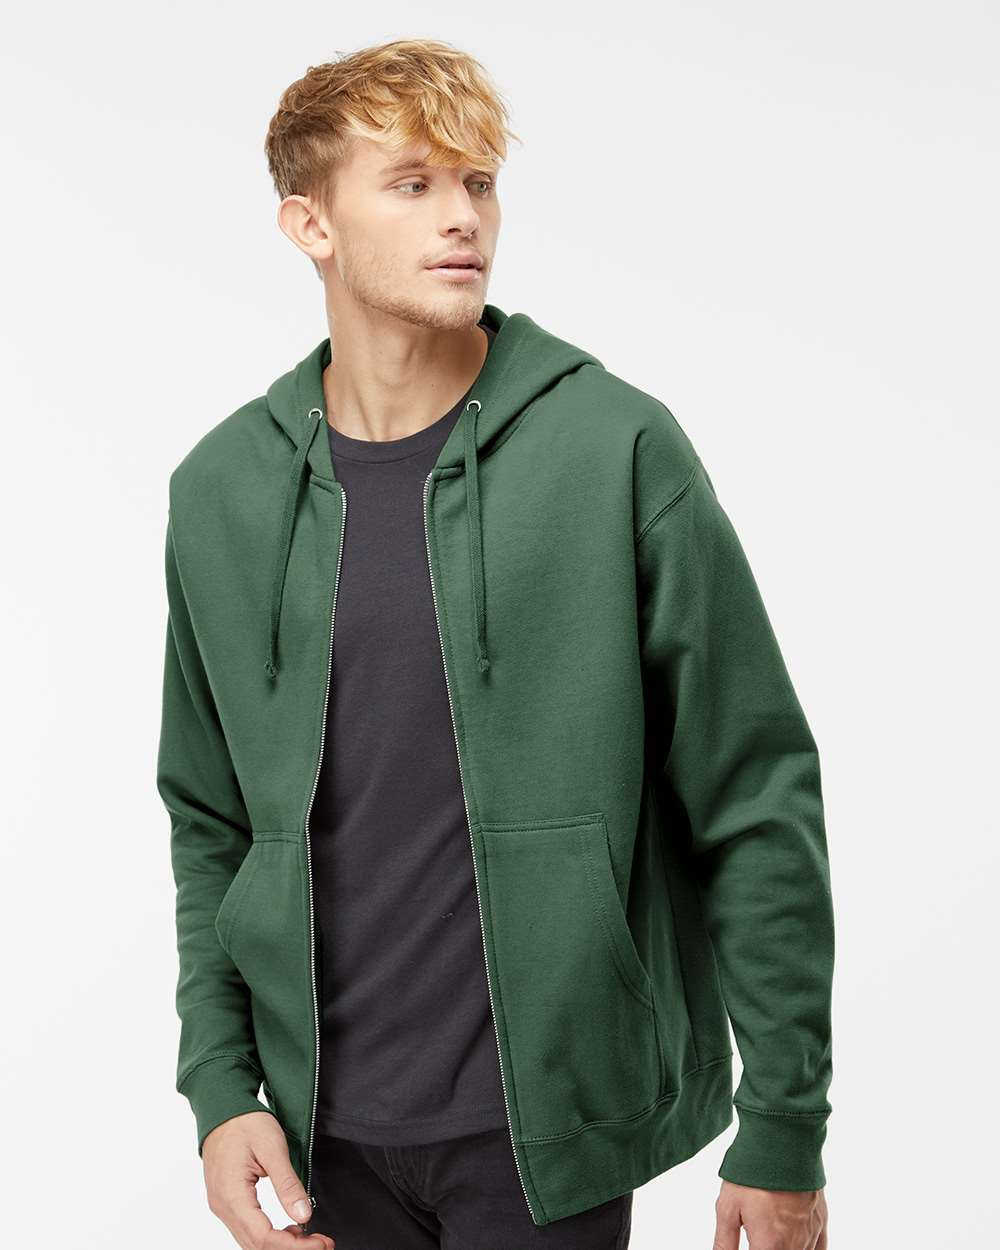 Independent Trading Co. Midweight Full-Zip Hooded Sweatshirt SS4500Z #colormdl_Alpine Green